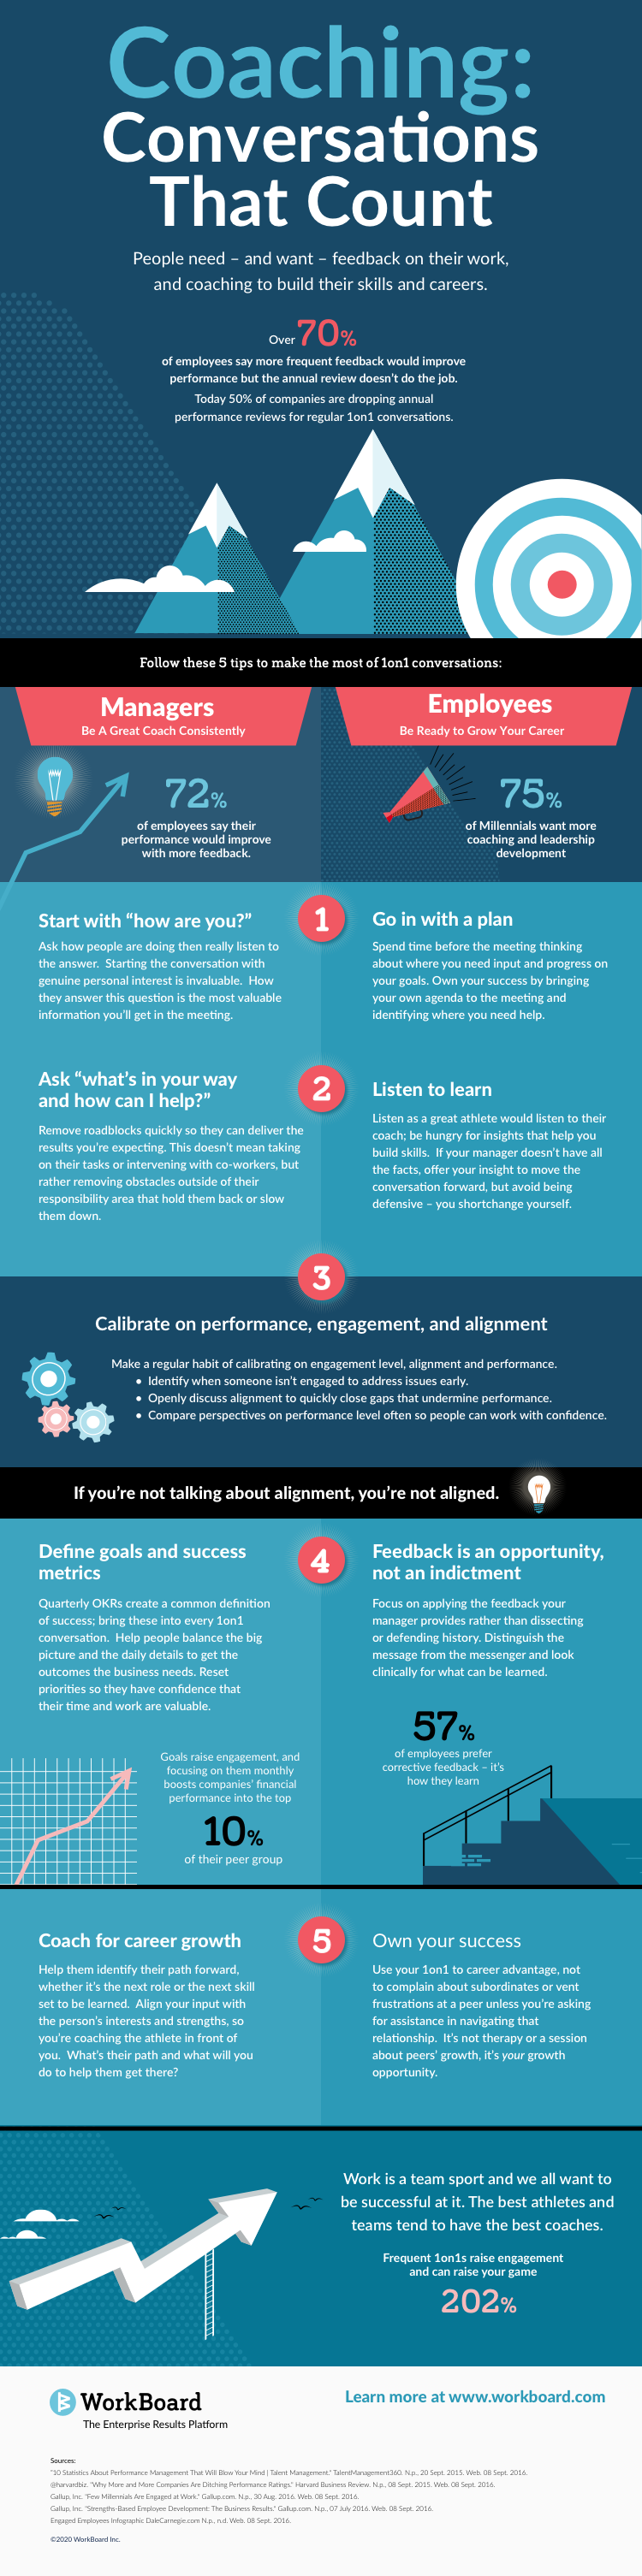 Infographic: Coaching:
Conversations That Count